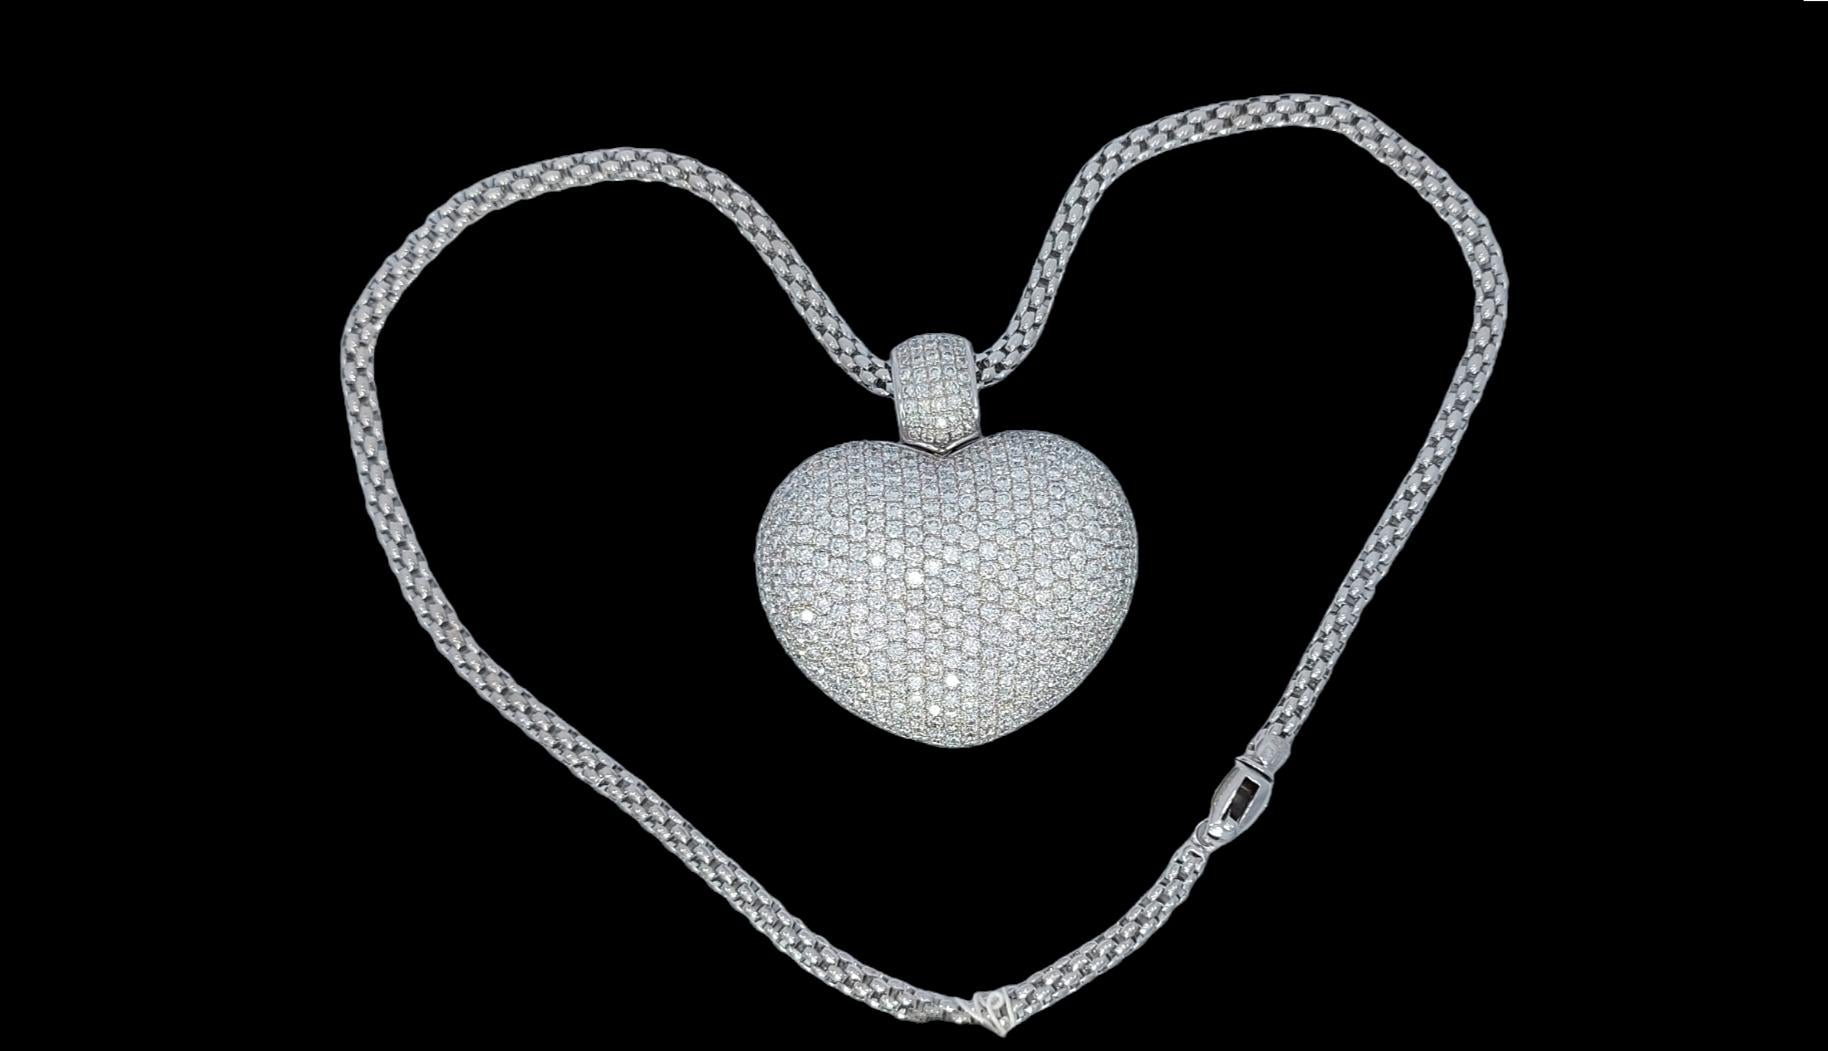 18kt White Gold Heart Pendant With 17 ct. Diamonds With 18kt White Gold Necklace For Sale 3